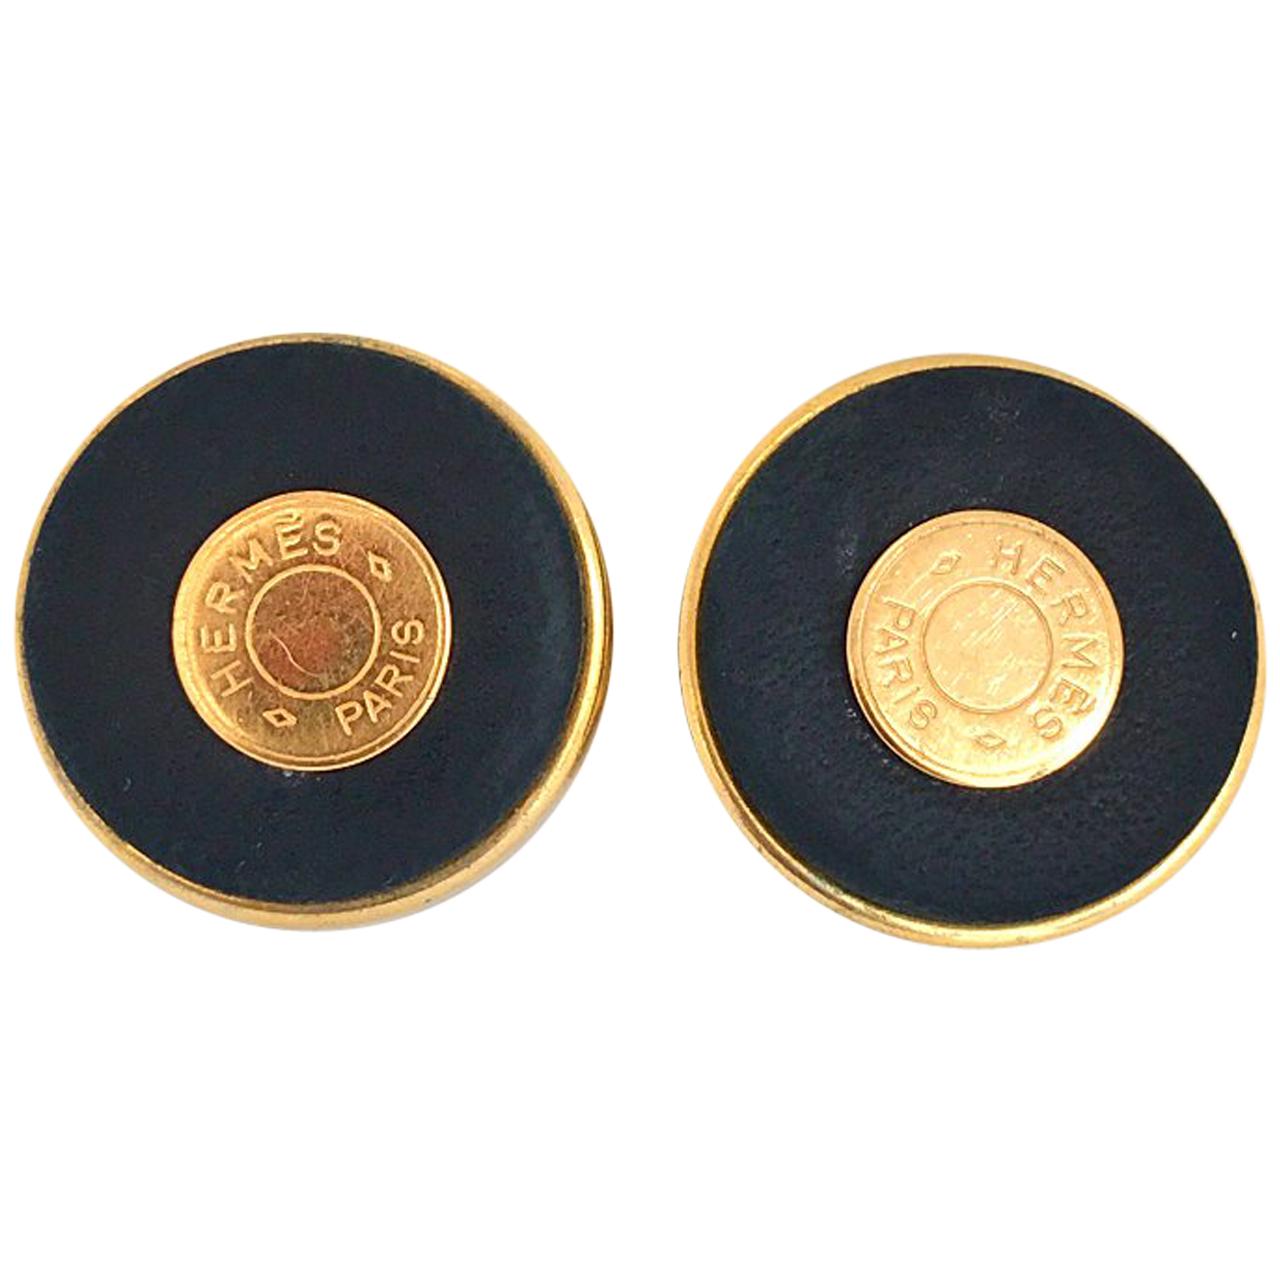 Hermes 24 Karat Gold Plated Black Leather Statement Clip on Earrings with Logo